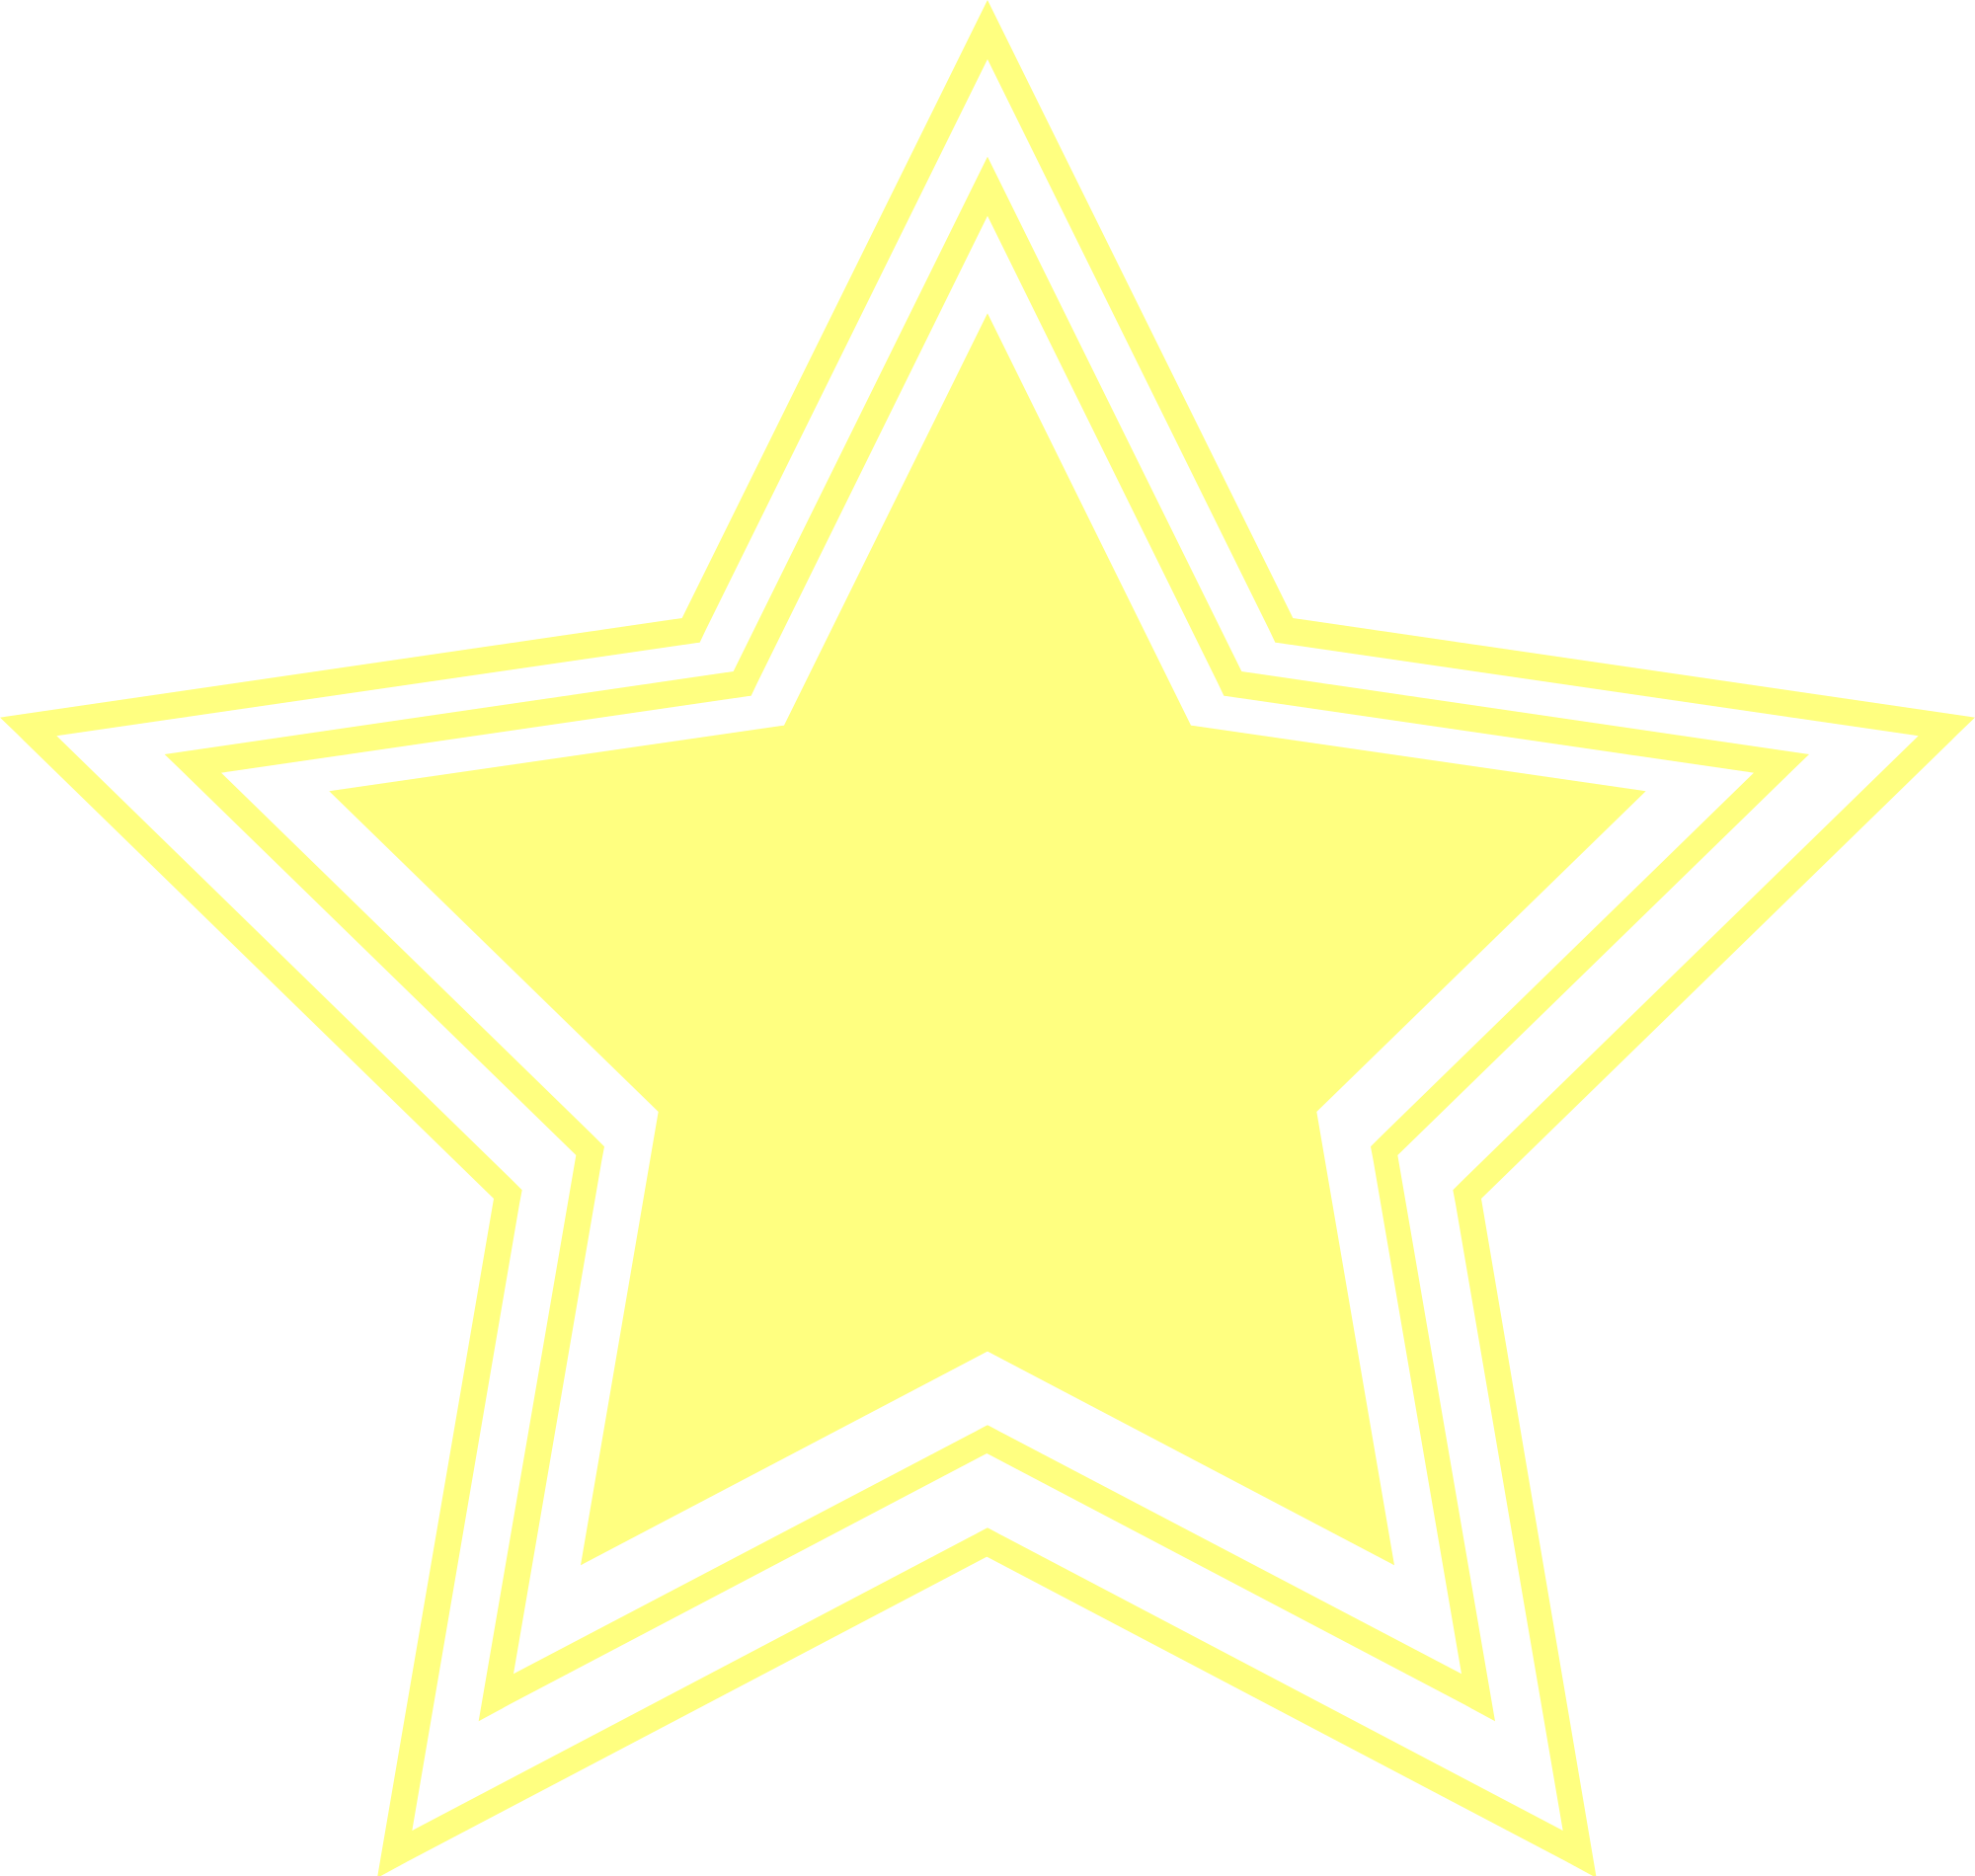 Open - Yellow Star Transparent Background (2000x1900)